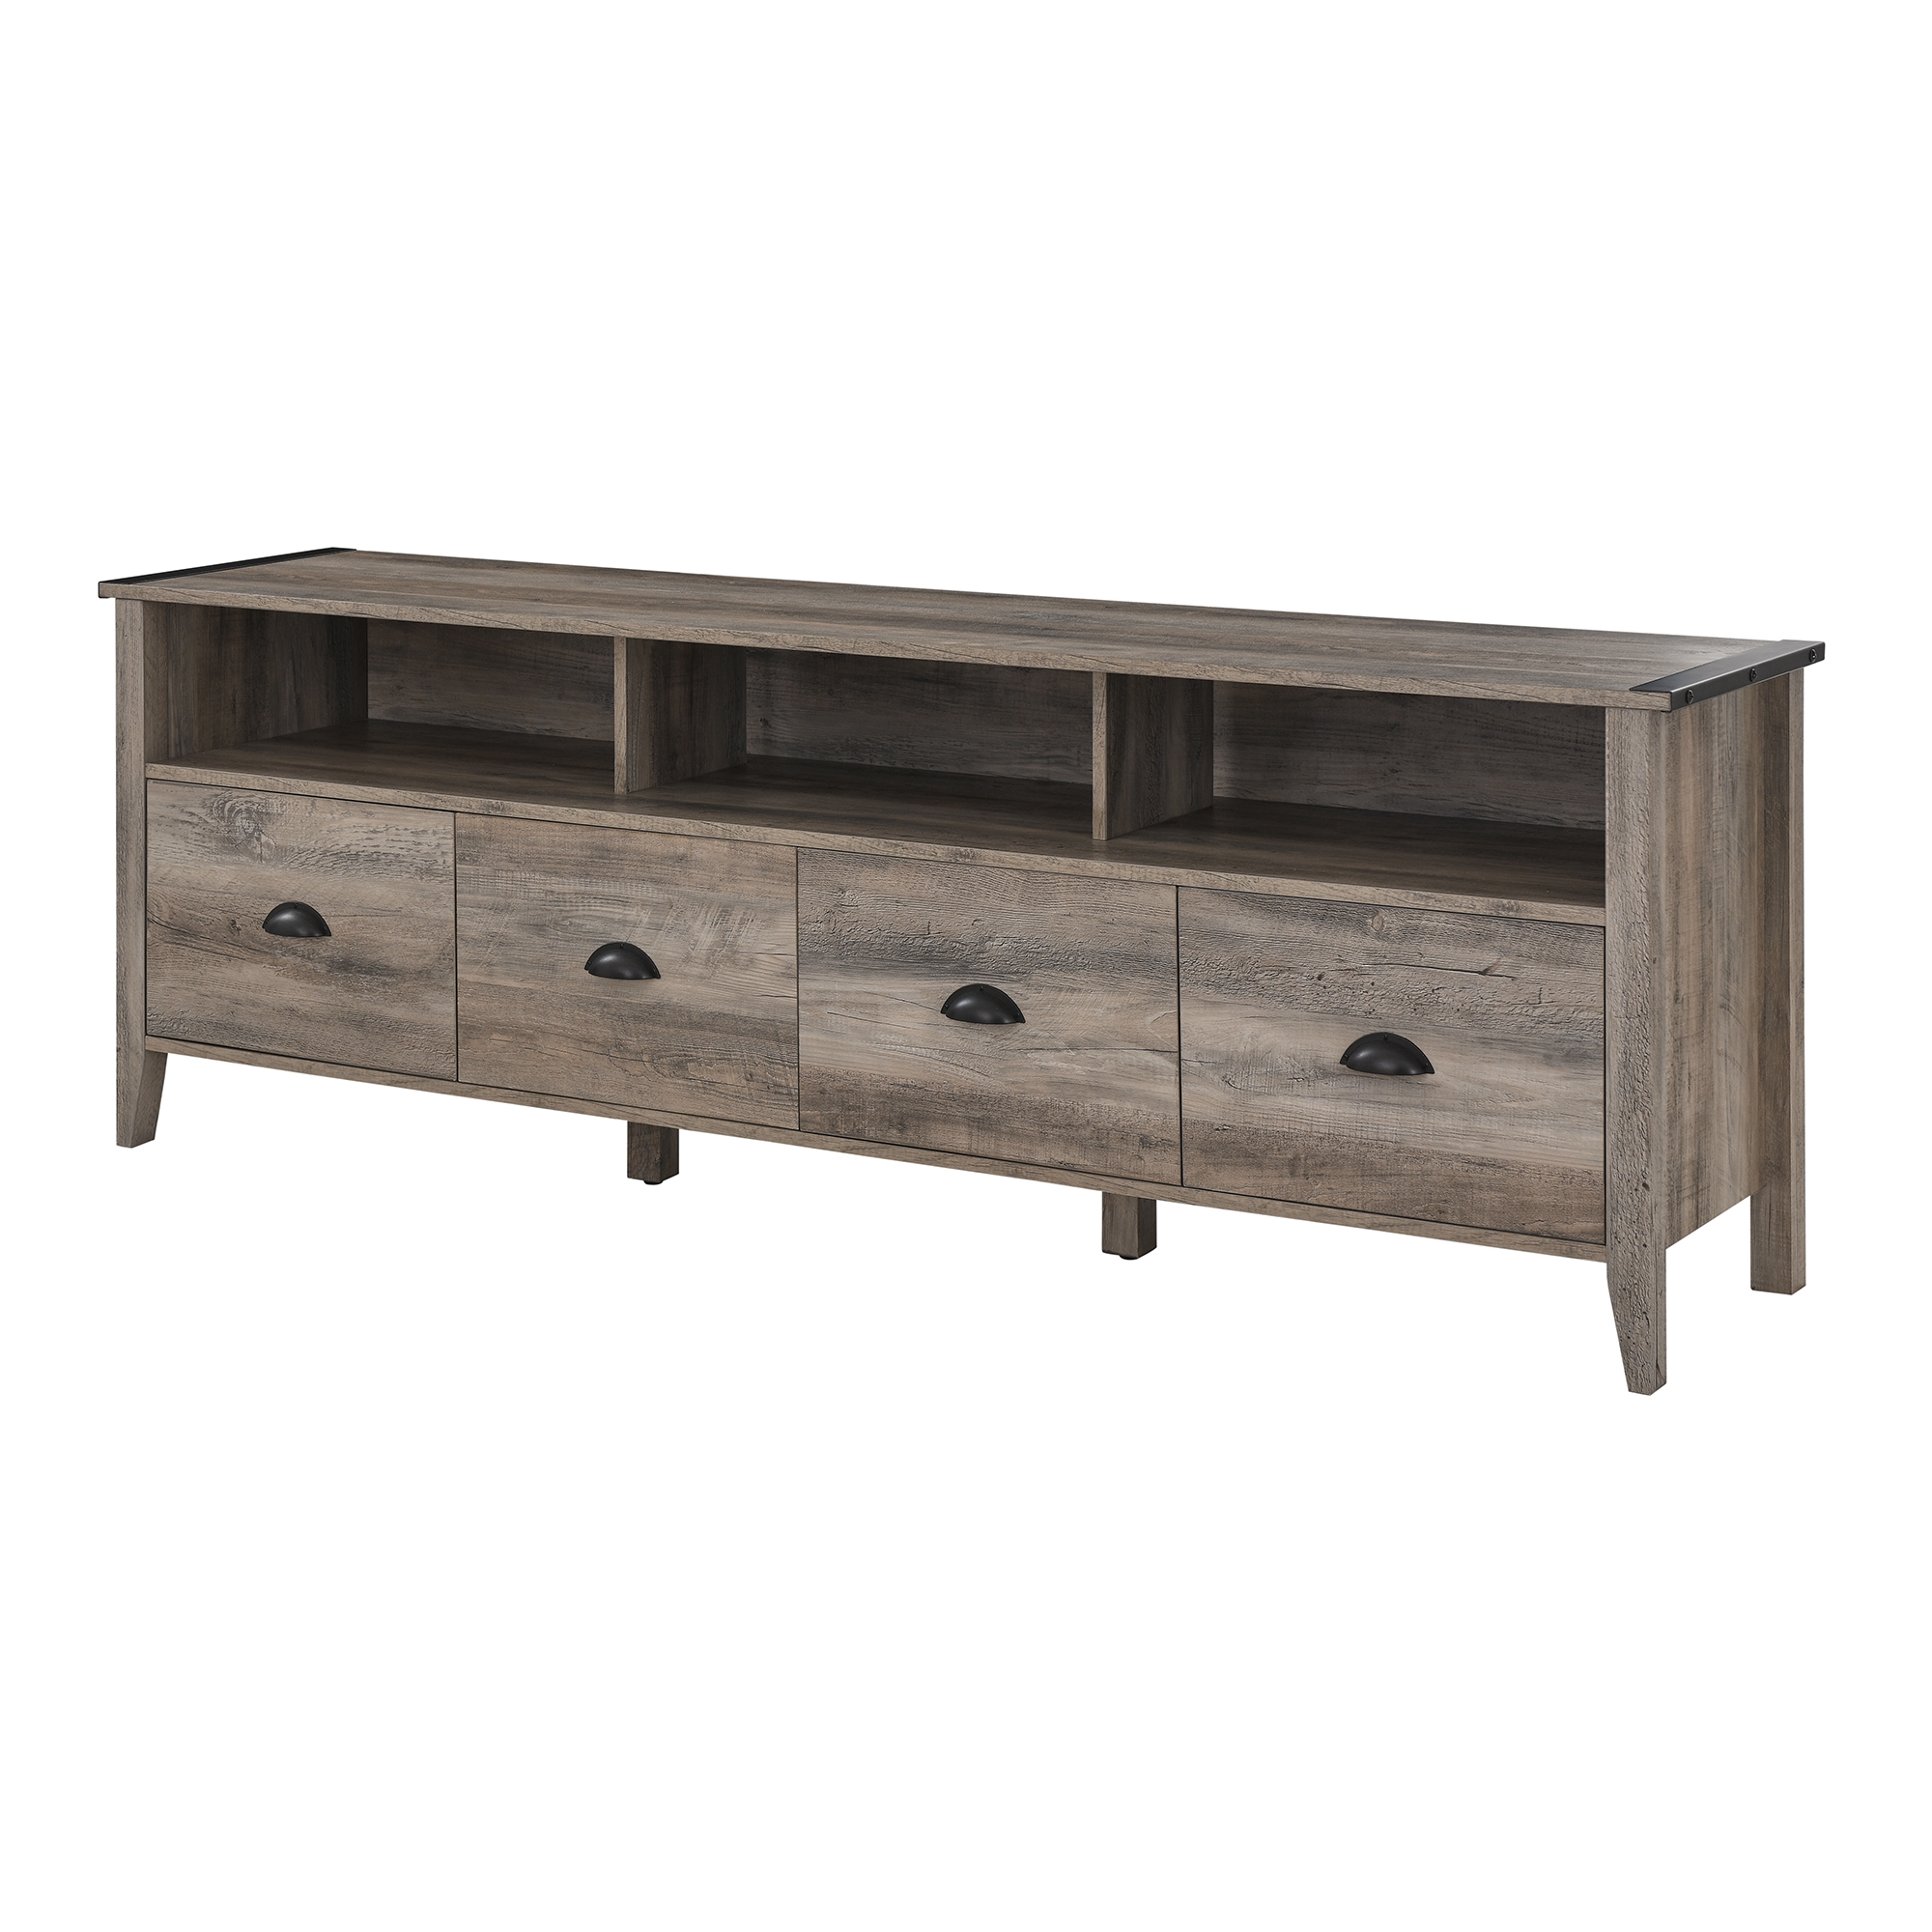 Clair 70" Industrial Farmhouse 4-Drawer TV Stand - Grey Wash - Image 2